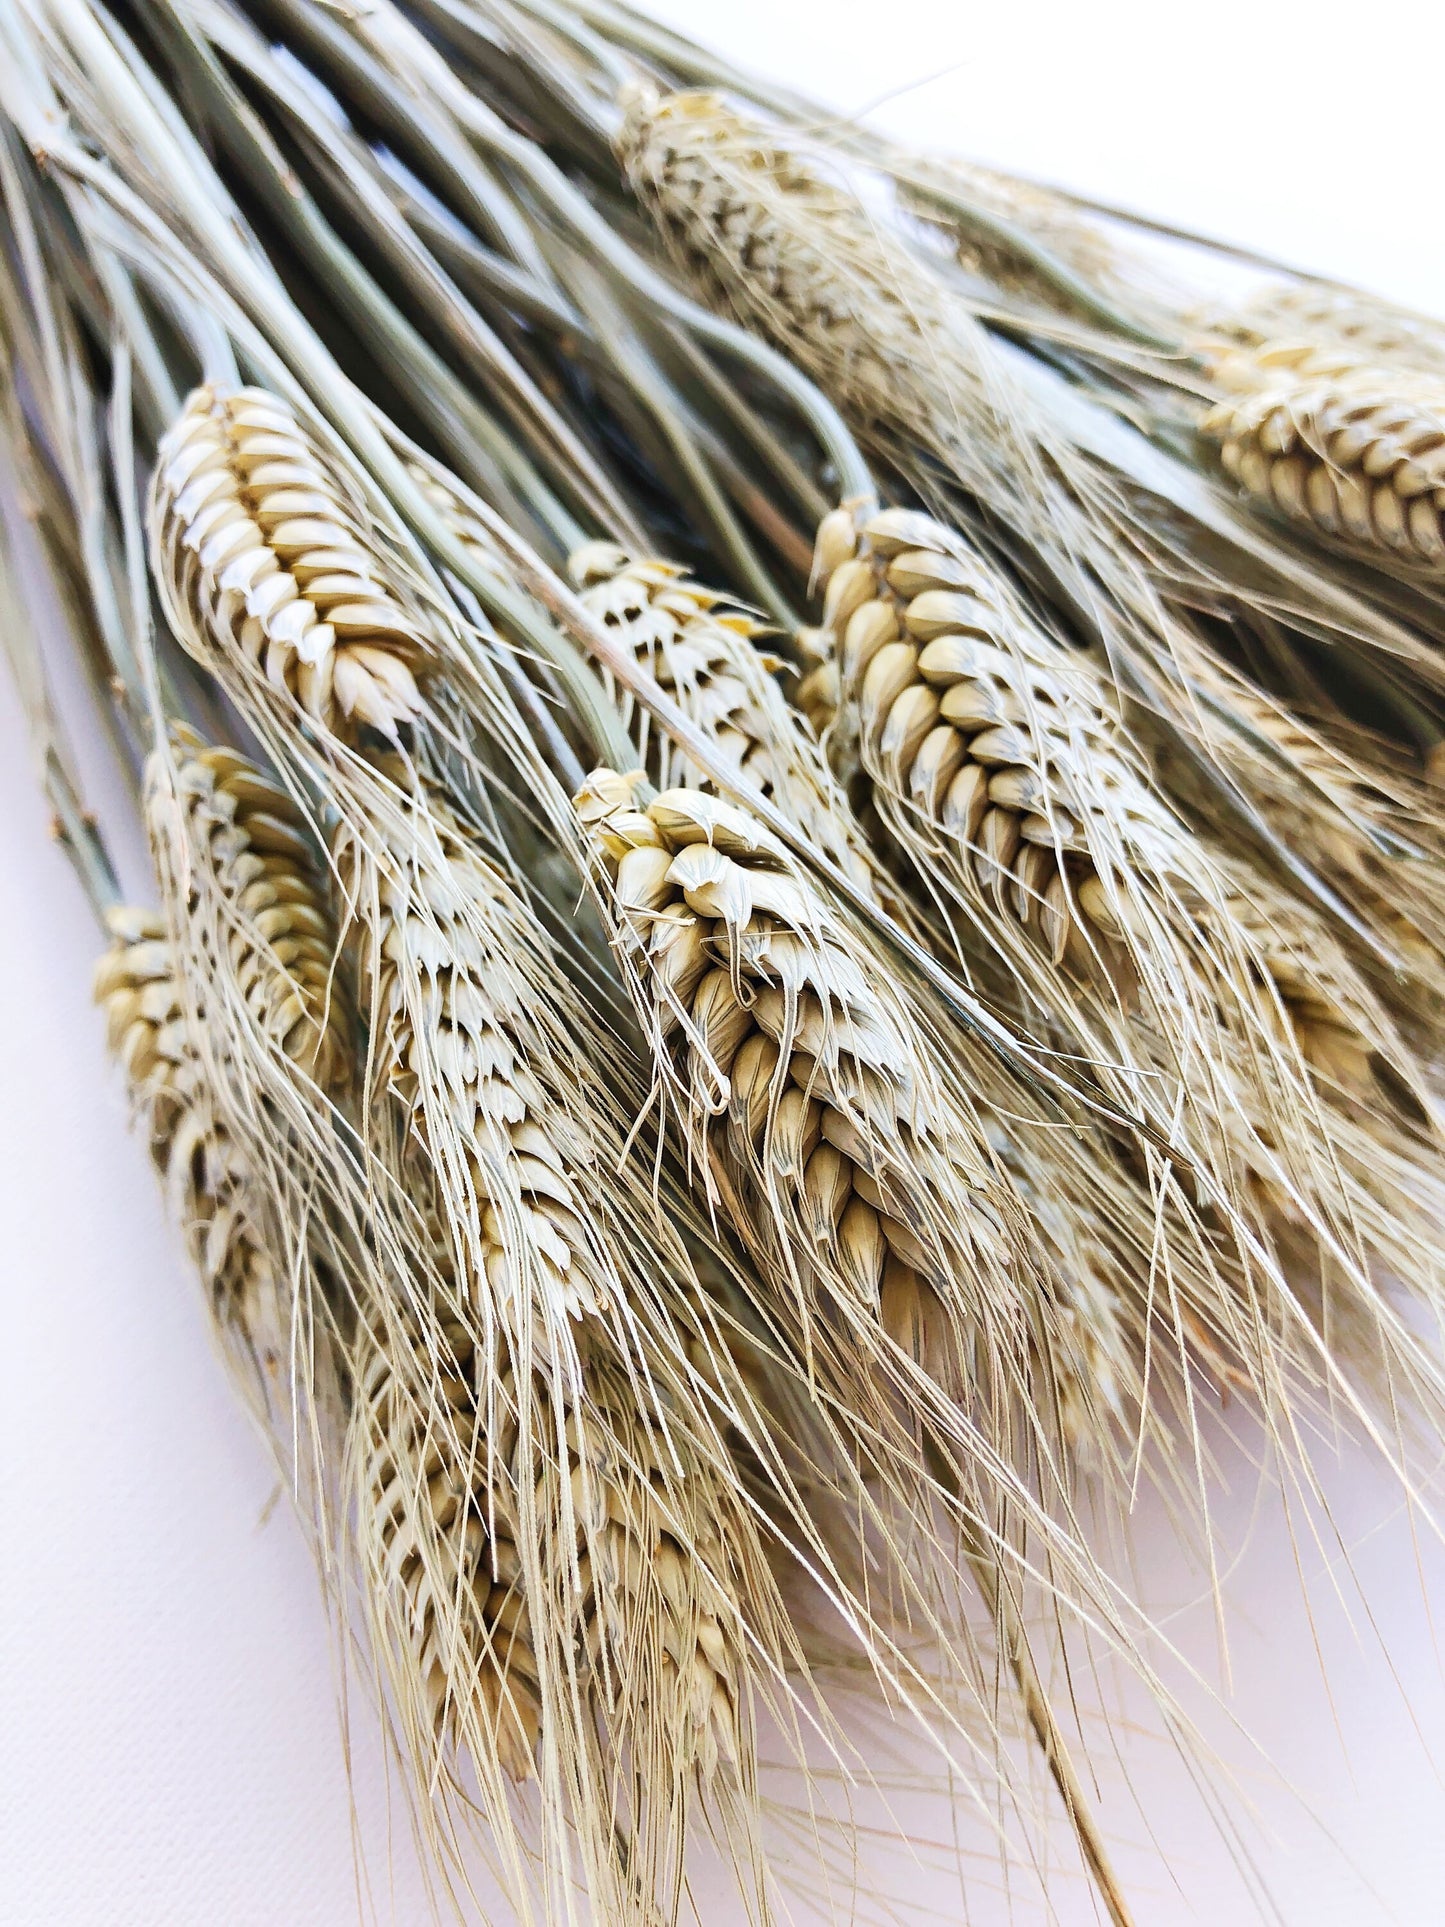 Club Wheat, Green Wheat, Dried Flowers, Bearded Wheat, Cereal Grain, Bouquet, Filler Flowers, Fall, Wedding, Dry Floral, Oats, Home Decor